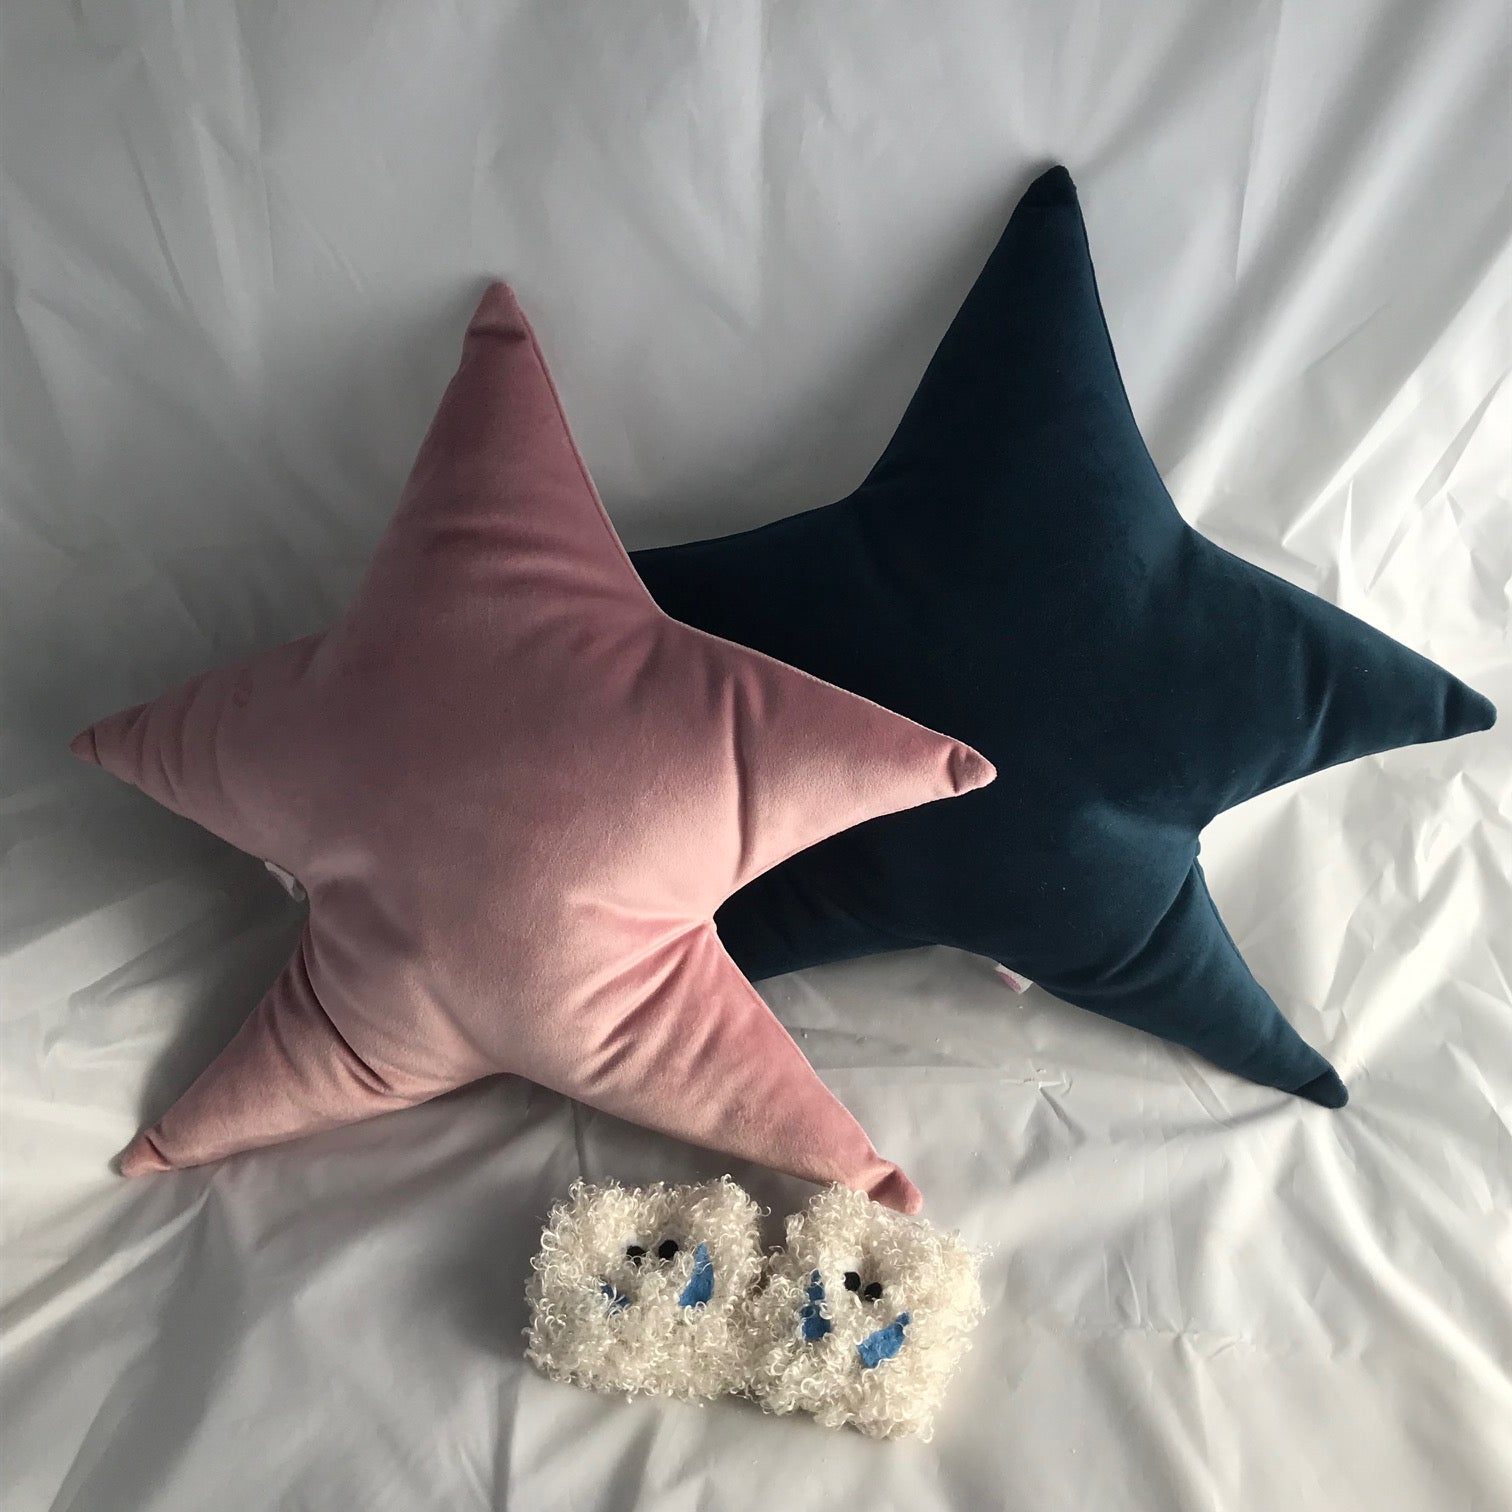 Star Faux Velvet Cushions in gold, cerise, purple, navy blue and pink. Perfect for cosy corners in kids bedrooms.